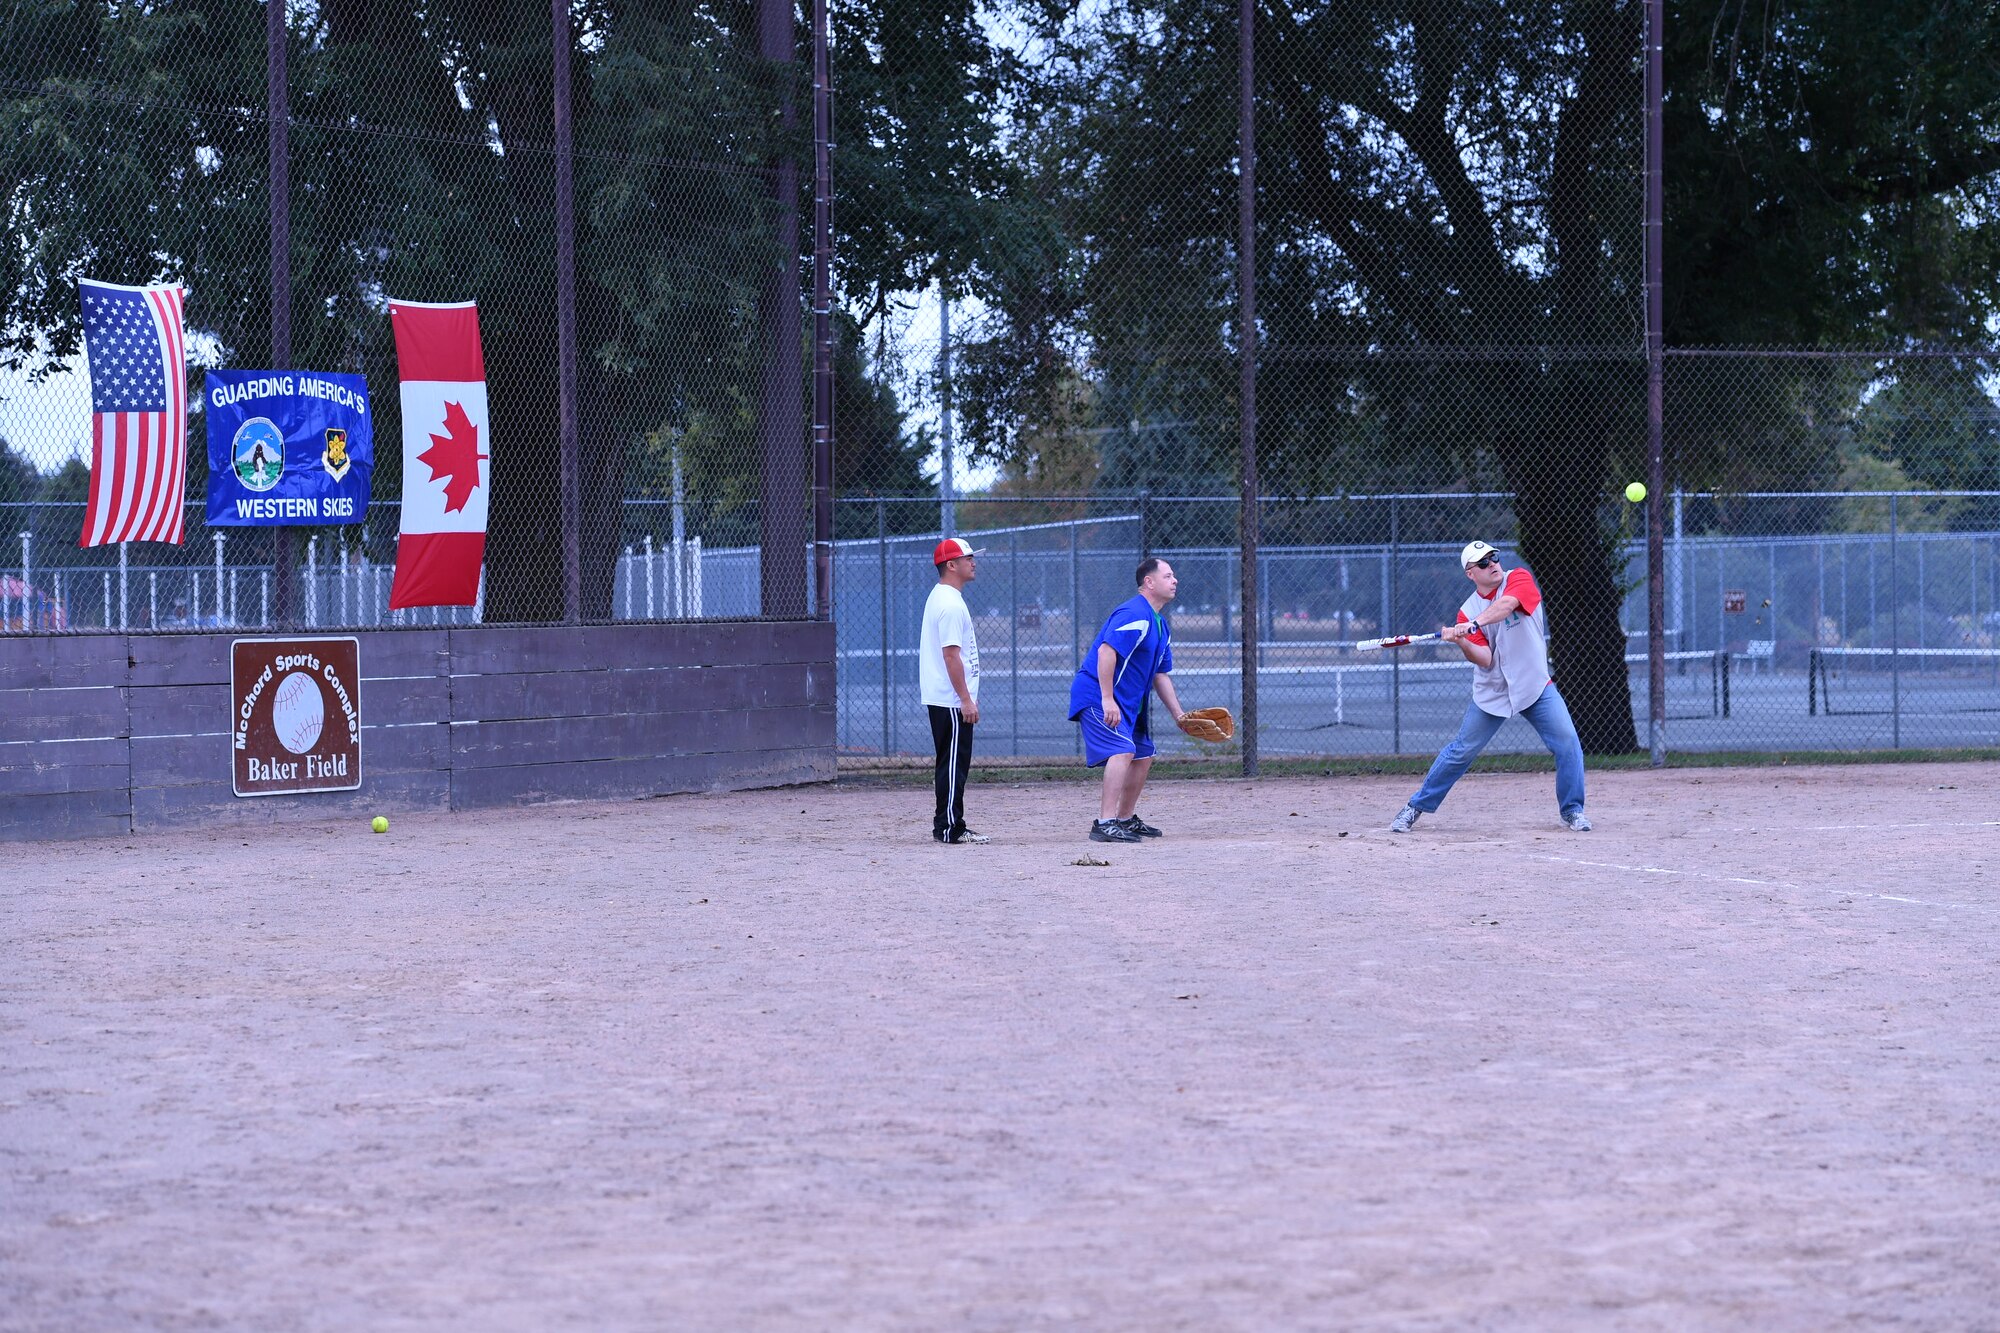 Canadian Detachment commander, Lt. Col. Matthew Wappler, hits a fly ball to left field during the Western Air Defense Sector U.S. vs Canada Softball Challenge Cup Sept. 1.  The U.S. won with a final score of 22 to 7. (U.S. Air National Guard photo by Capt. Kimberly D. Burke)